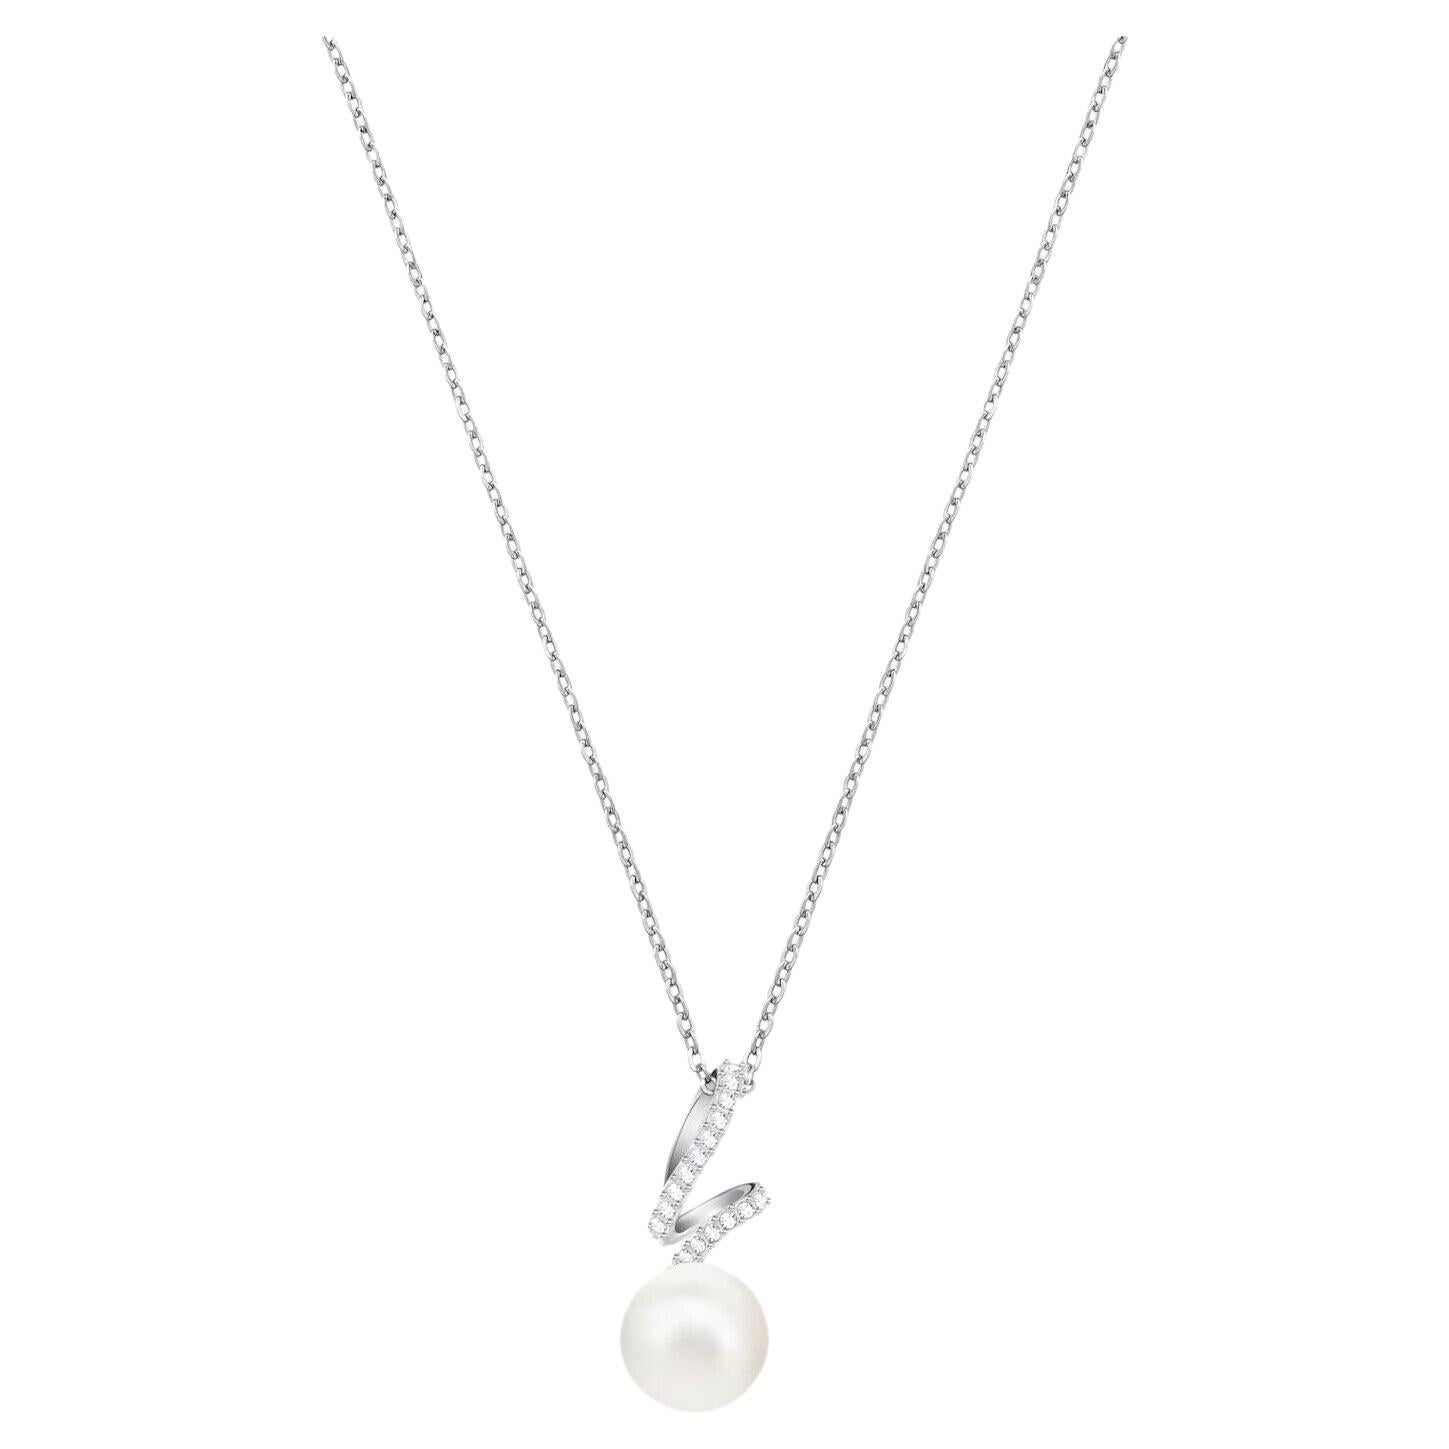 Swarovski Dangle White Round Pearl Crystals Spiral Hook Pendant Silver Necklace For Sale